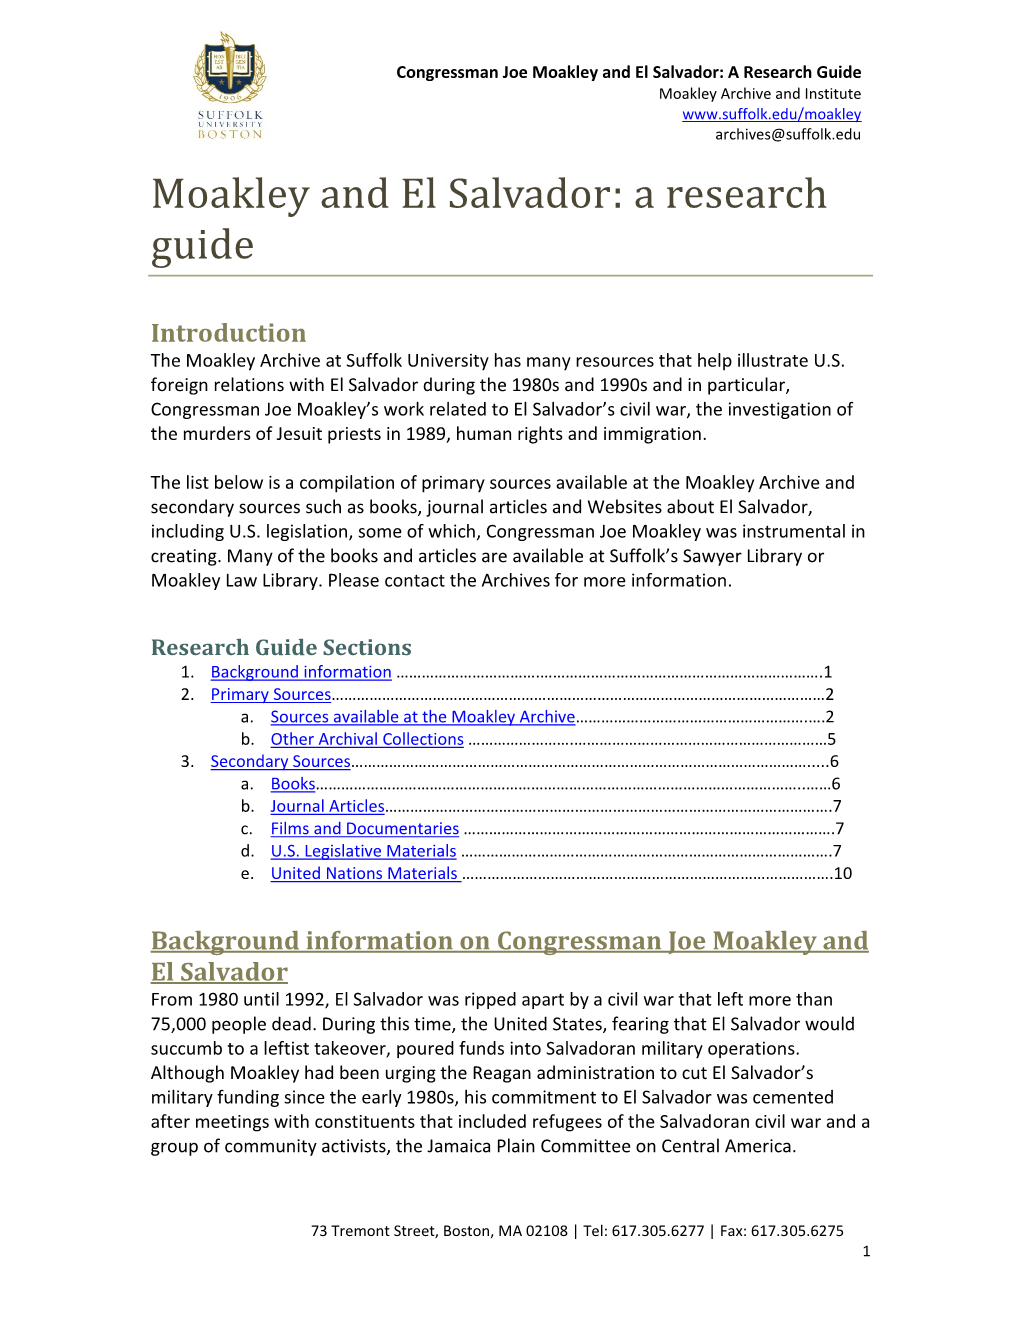 Moakley and El Salvador: a Research Guide Moakley Archive and Institute Archives@Suffolk.Edu